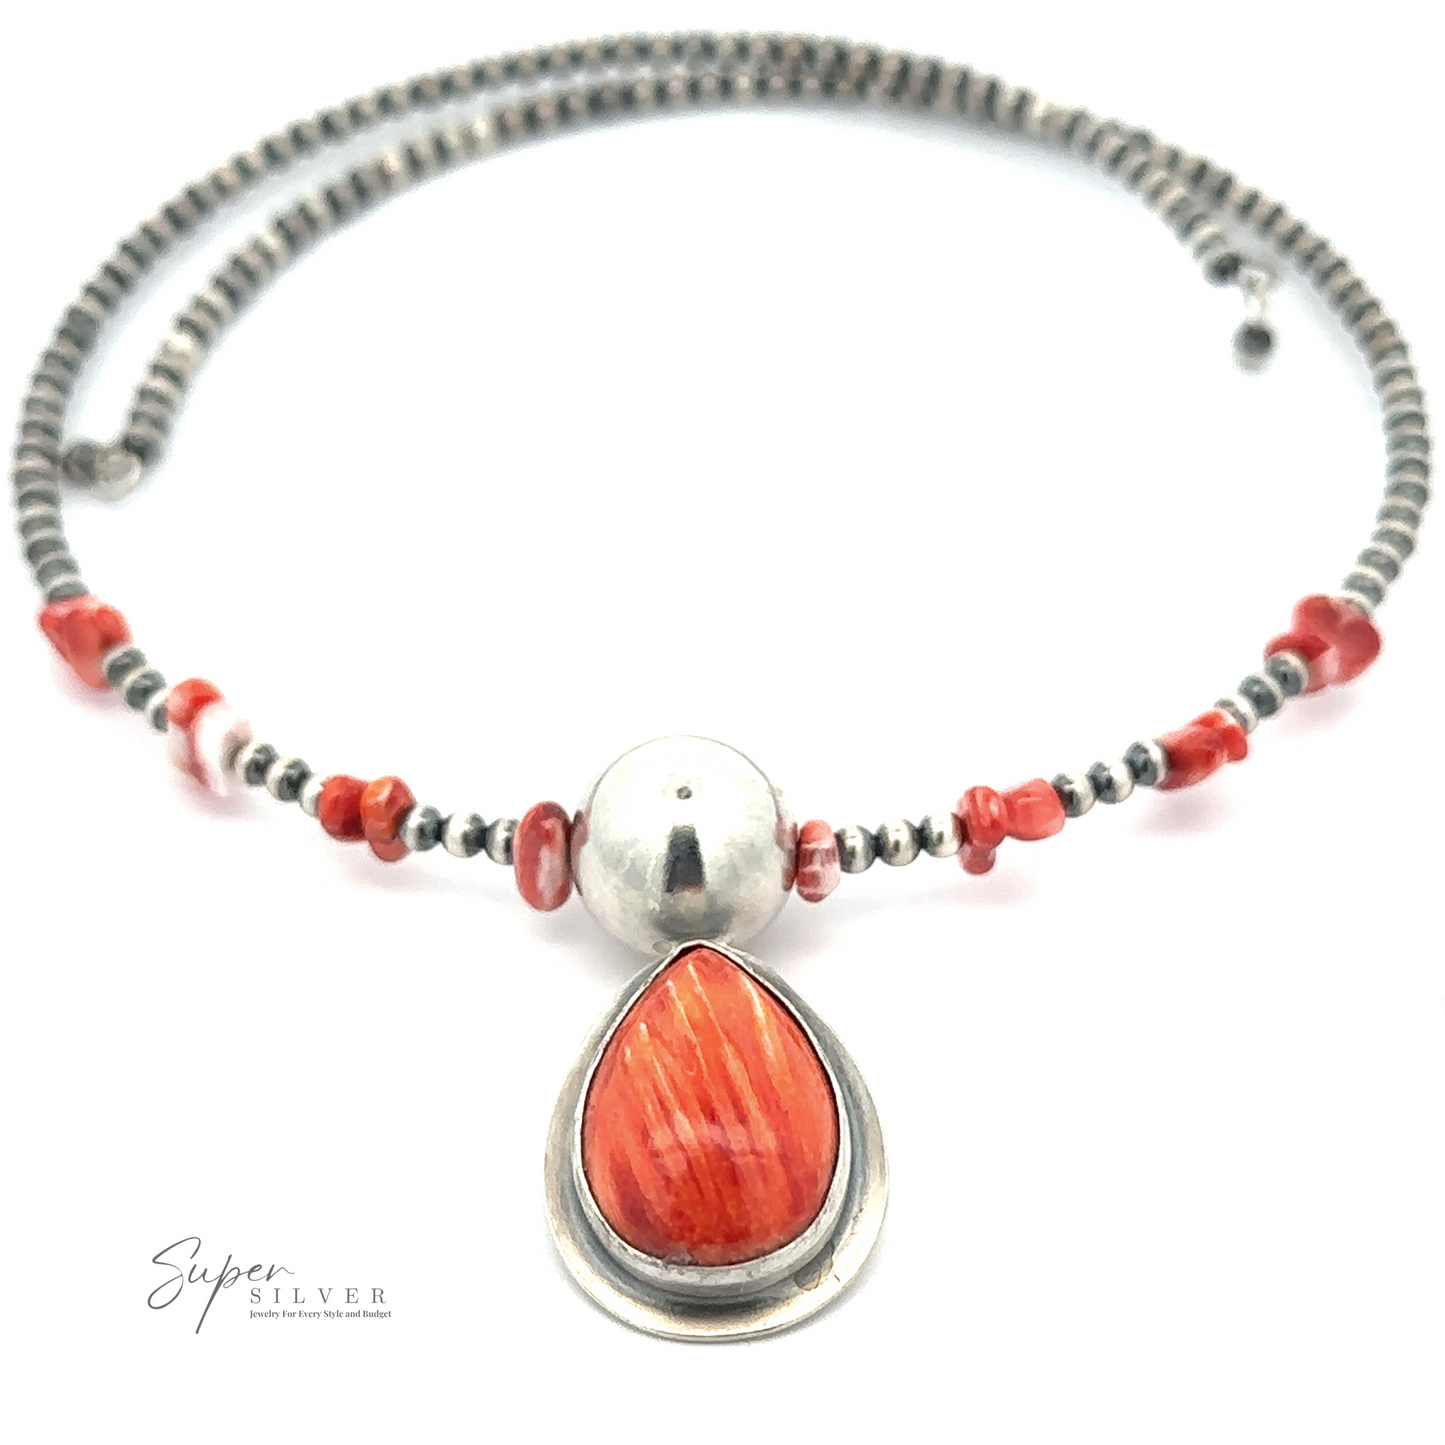 
                  
                    A beaded necklace with an orange teardrop-shaped pendant, silver beads, and smaller red beads is displayed on a white background. Crafted by Native American artisans, this exquisite piece showcases the Wrap Around Spiny Oyster Shell Choker Necklace in the corner.
                  
                